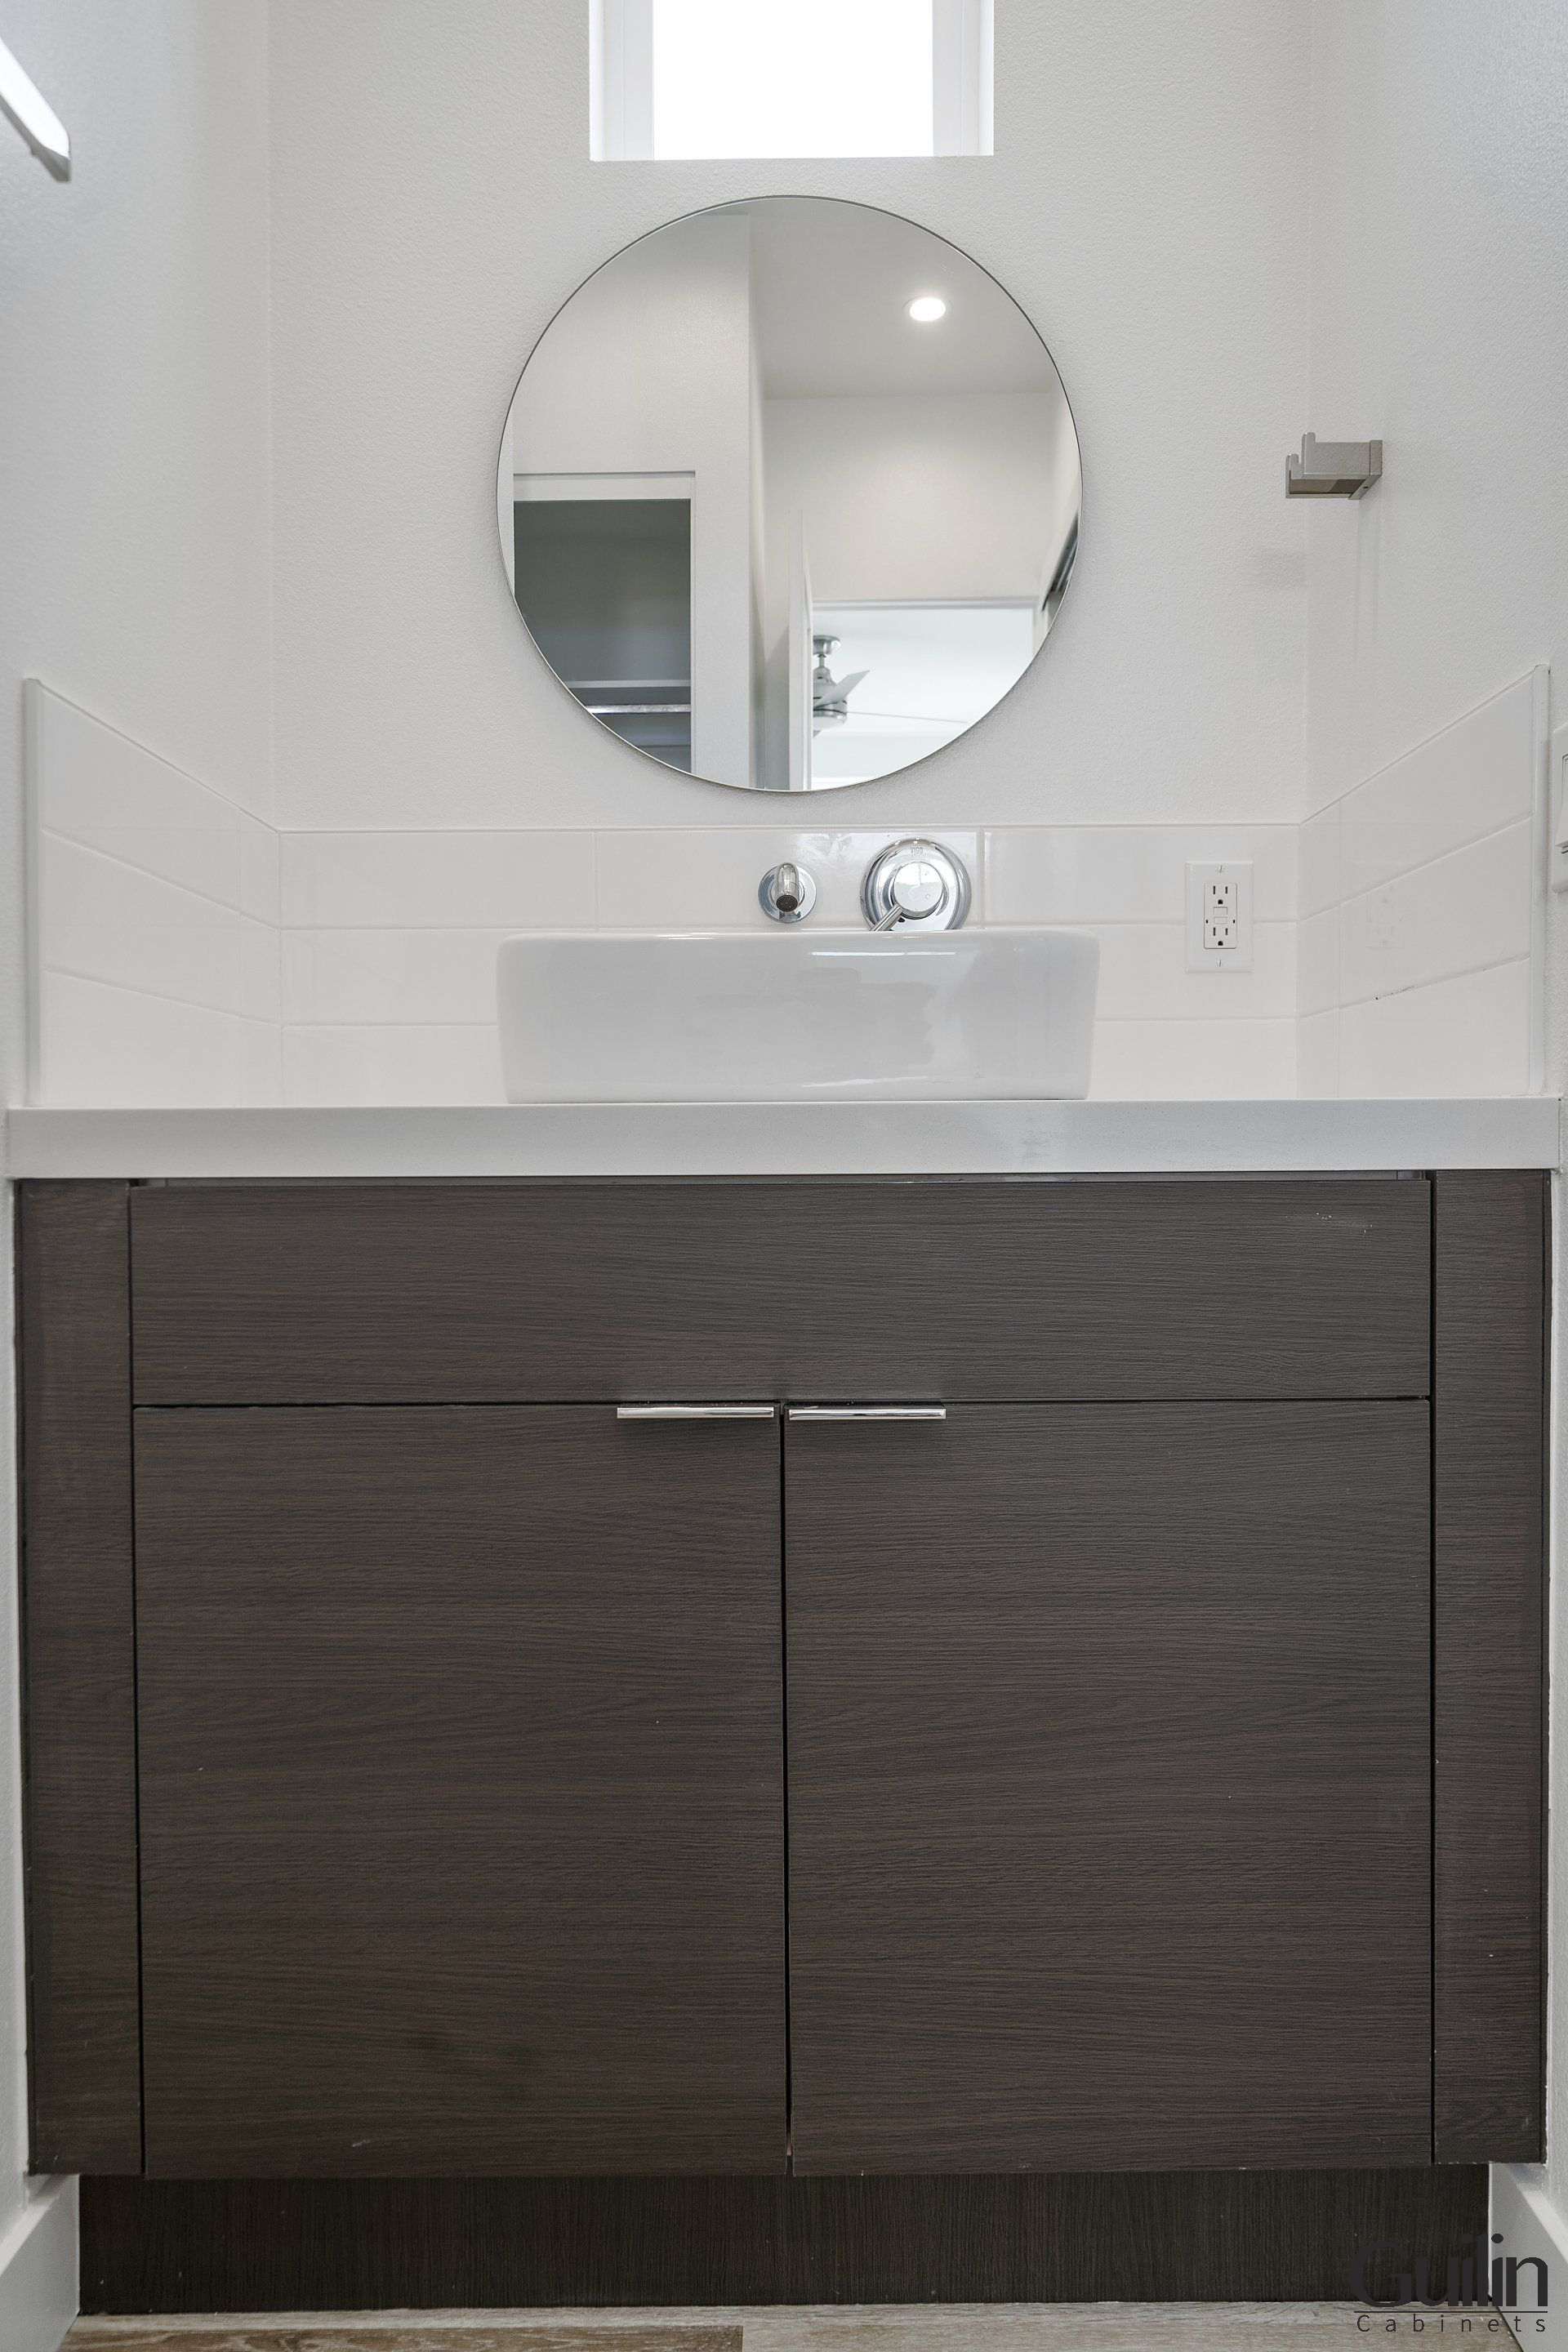 A freestanding vanity has a timeless appearance that works with many different types of bathroom decor, making it a popular choice for decades.